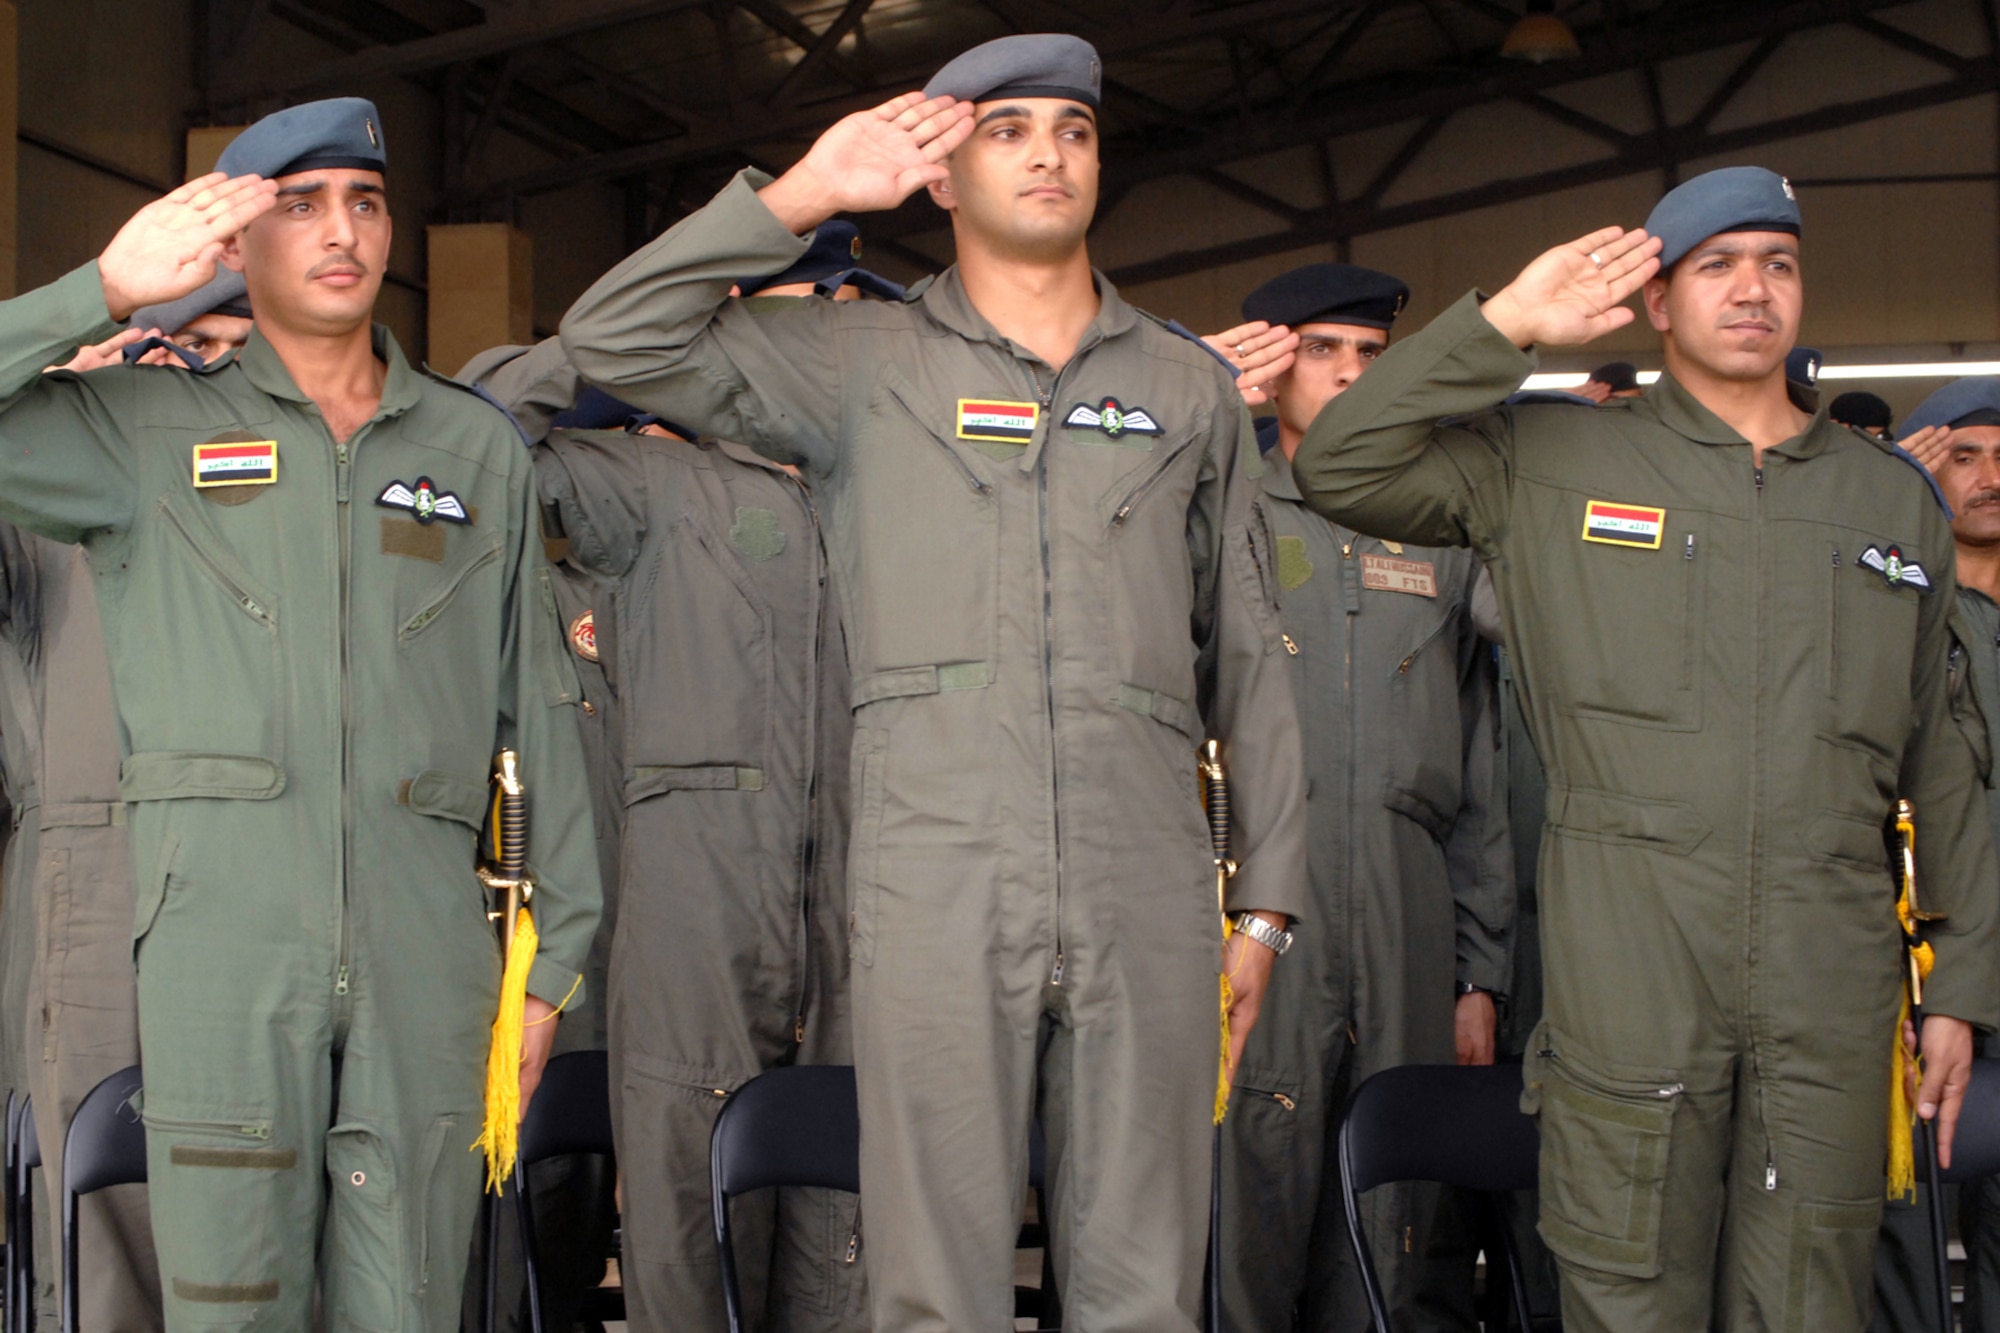 Iraqi air force 2nd Lts. Habeeb, Majid and Hassan salute during the Iraqi national anthem at their graduation ceremony from Iraq's only fixed-wing flight training school Oct. 13 at Kirkuk Regional Air Base, Iraq. One graduate plans to become an instructor pilot for the school, and another will fly a King Air twin-turboprop aircraft on operational missions. The third will travel to the United States to learn to fly the T-6 Texan. (U.S. Air Force photo/Senior Airman Randi Flaugh)